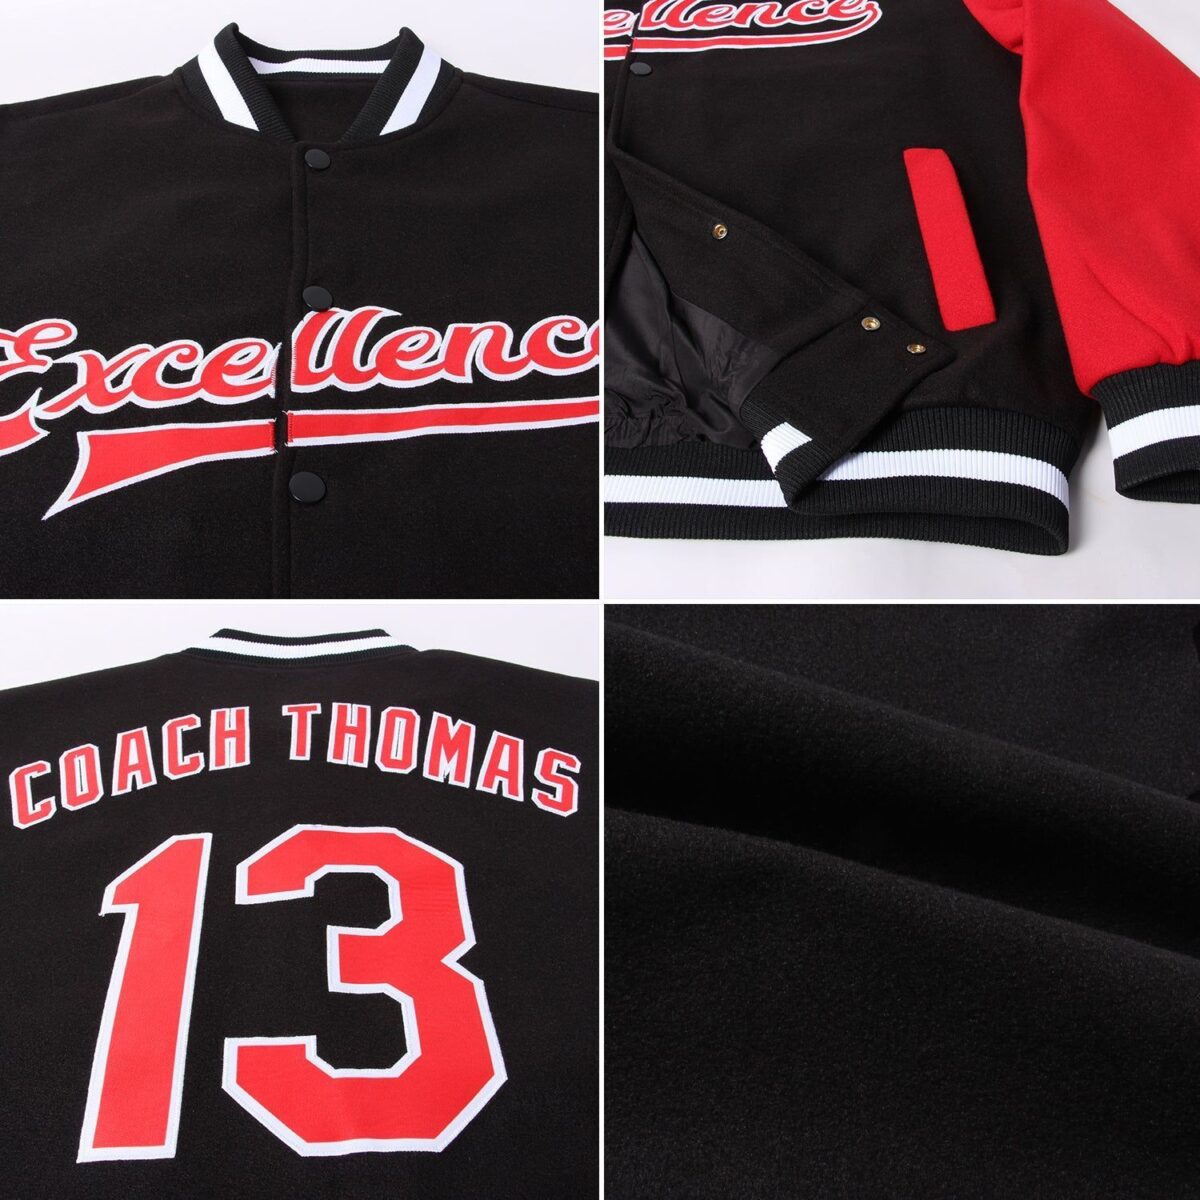 College Student Baseball Jackets with Black & Red 4